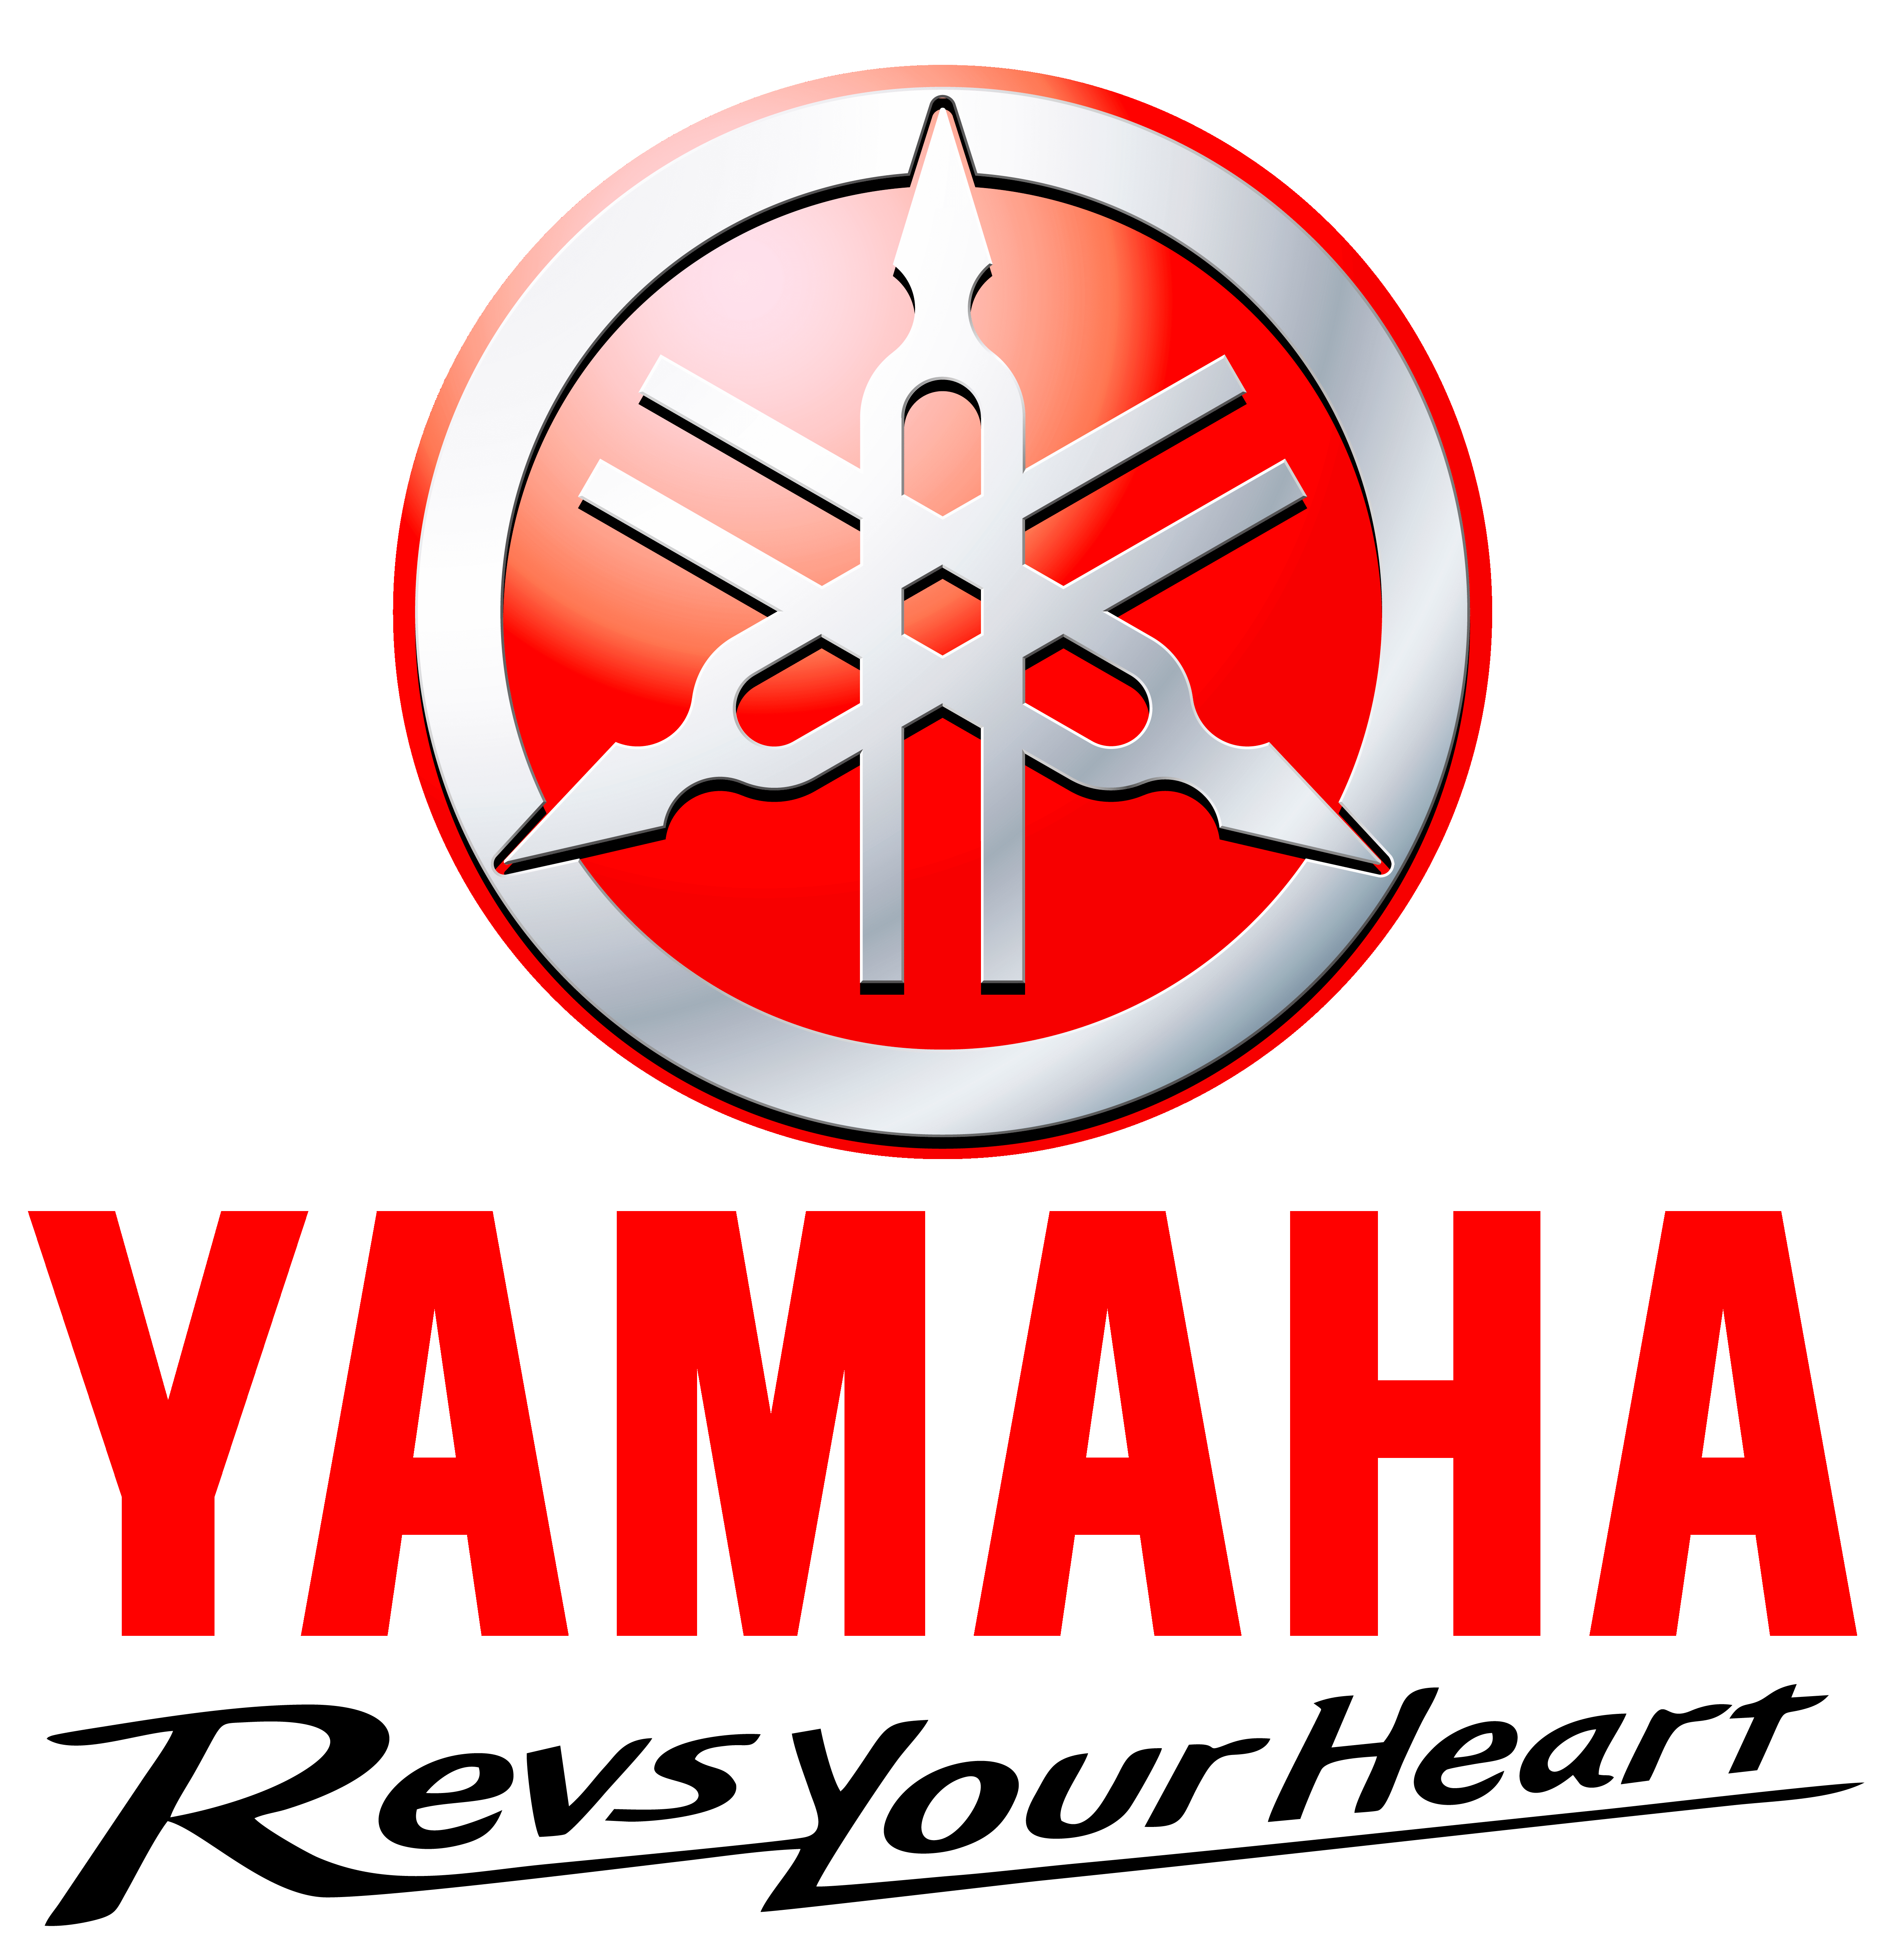 Yamaha motor logo yamaha logo yamaha motor yamaha motorcycles